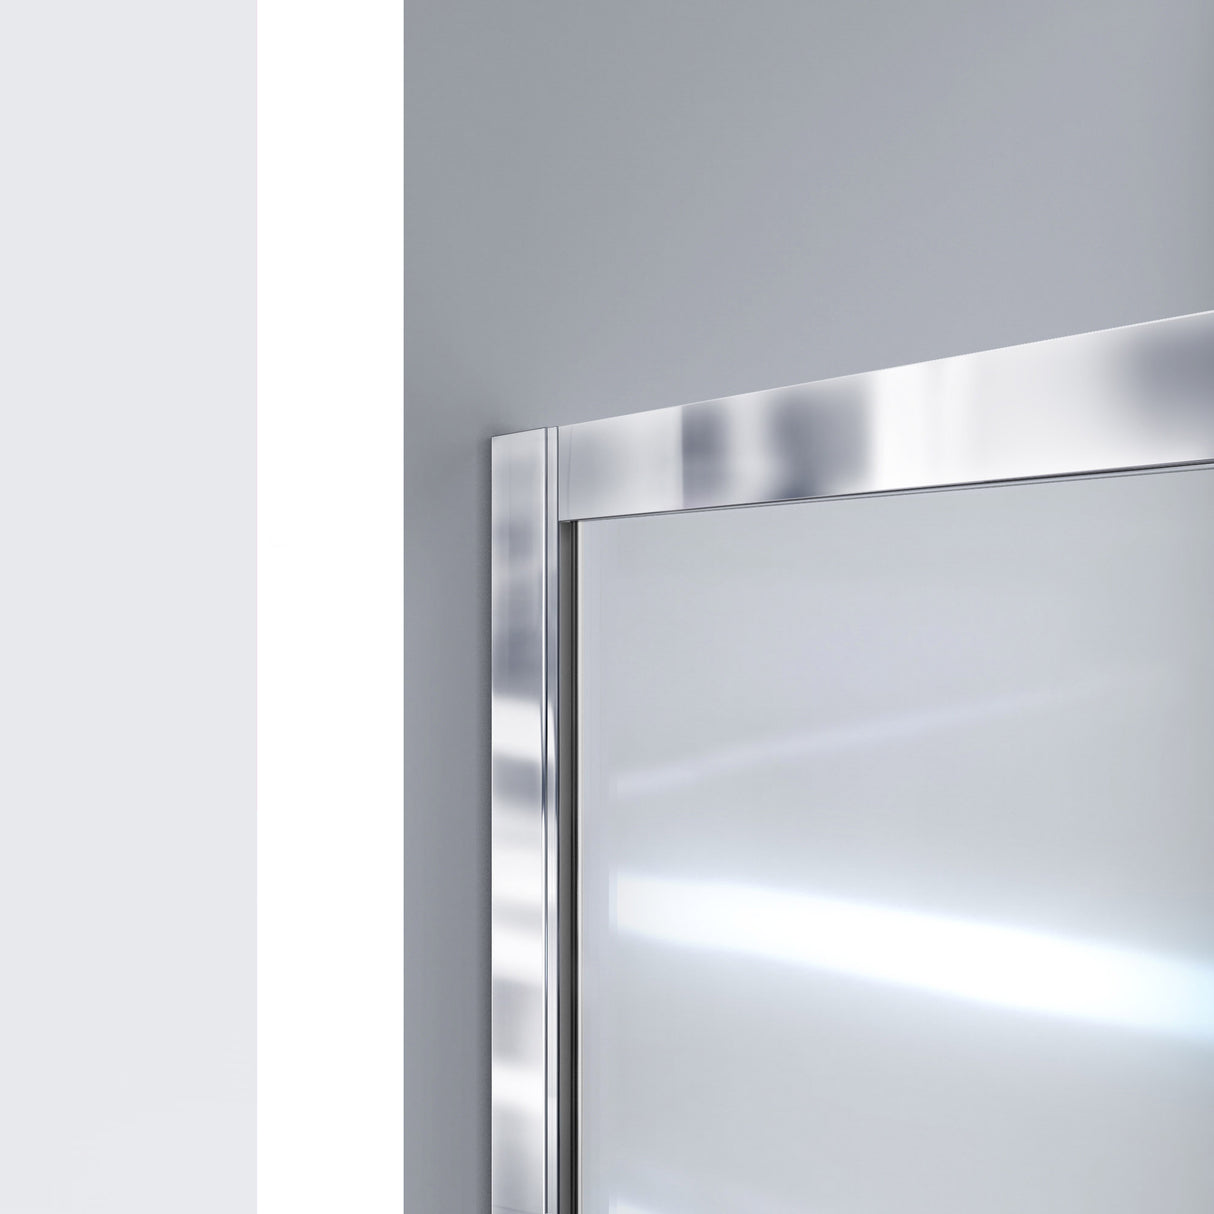 DreamLine Infinity-Z 34 in. D x 60 in. W x 78 3/4 in. H Sliding Shower Door, Base, and White Wall Kit in Chrome and Frosted Glass